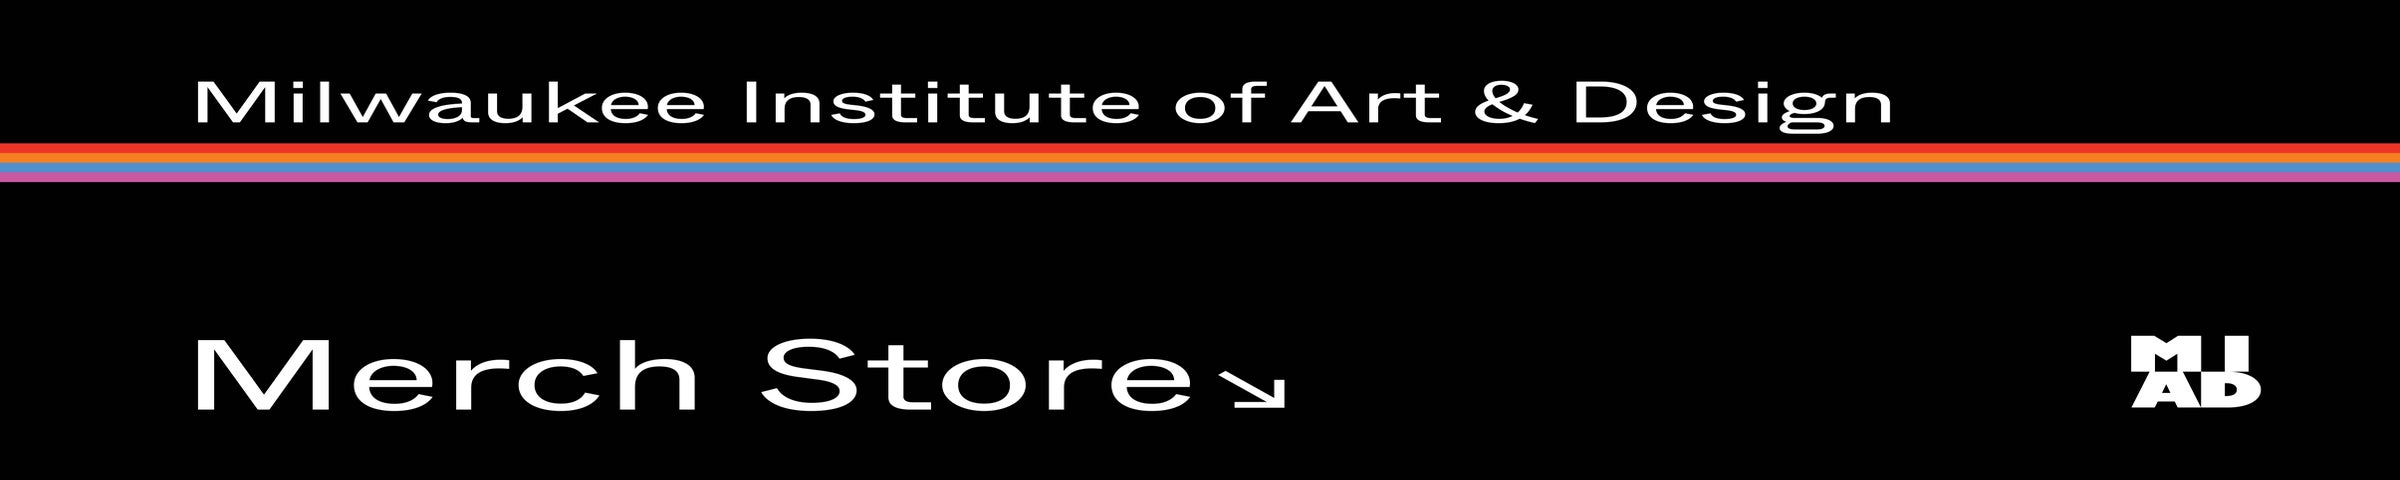 Fashion and Apparel Design Major - Milwaukee Institute of Art and Design